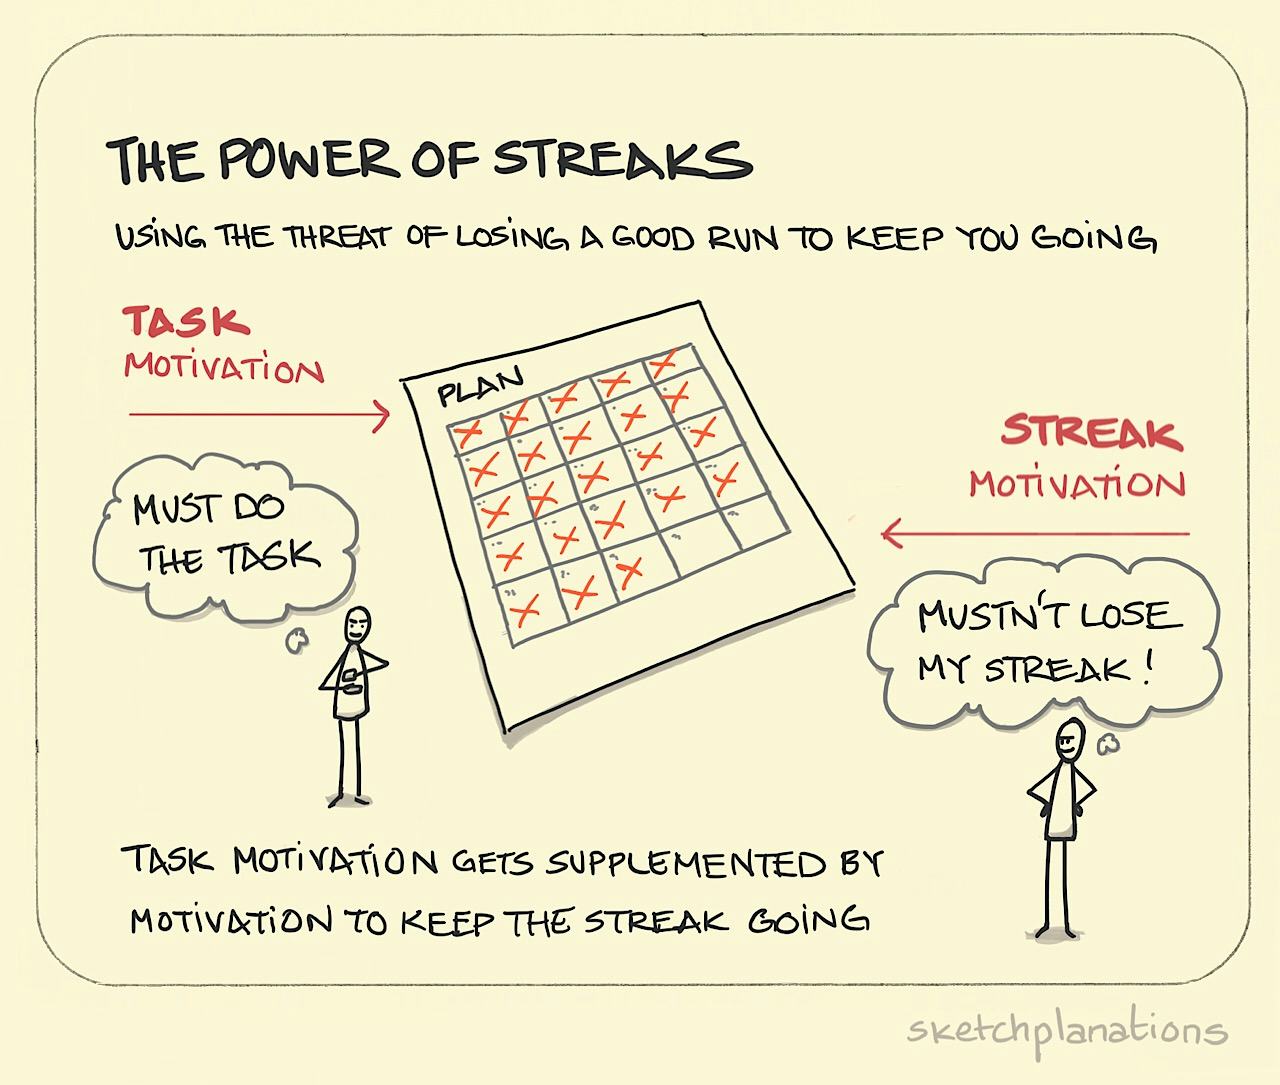 The power of streaks - Sketchplanations